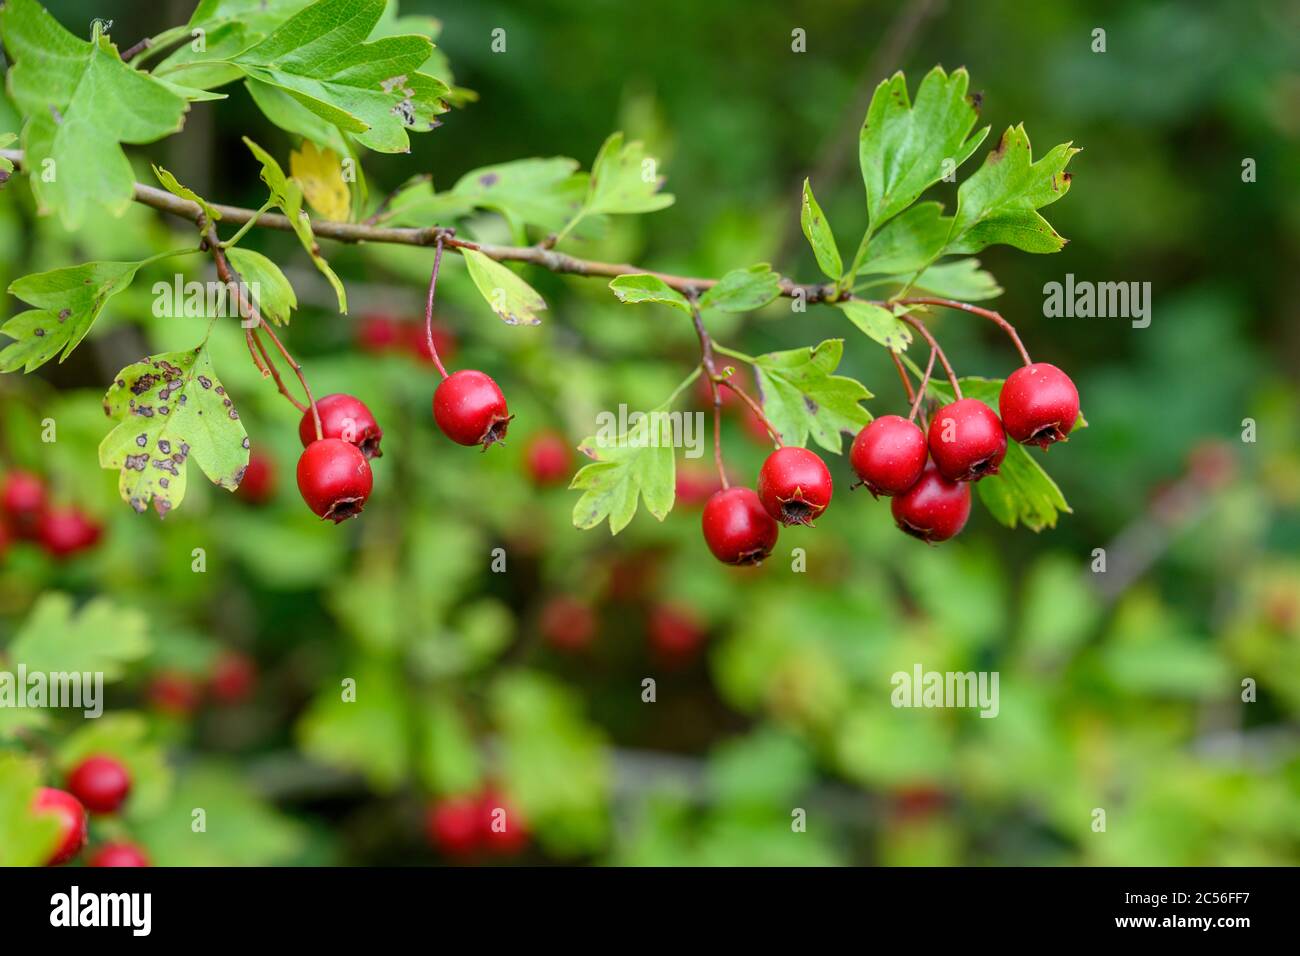 Hawthorn (Crataegus) branch with fruits. Stock Photo